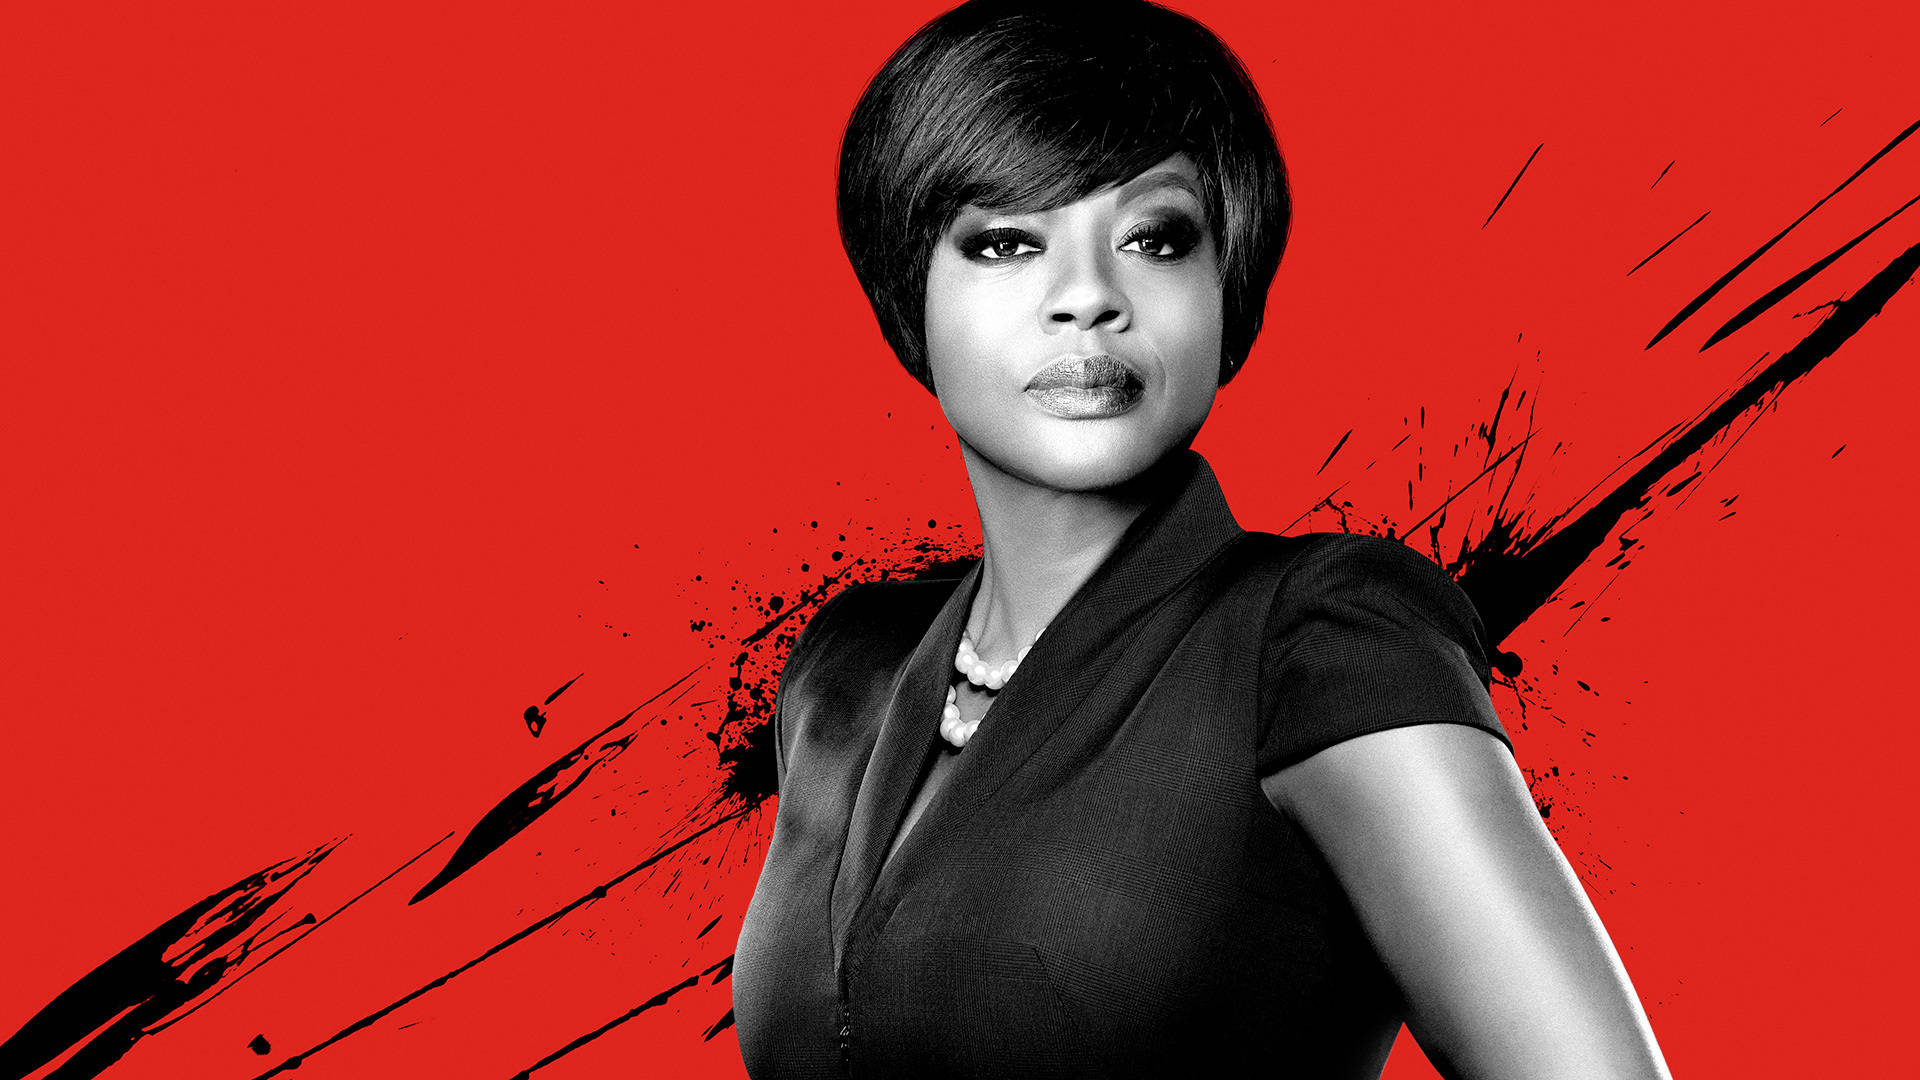 "Dramatic poster from the acclaimed TV show, 'How to Get Away with Murder'" Wallpaper